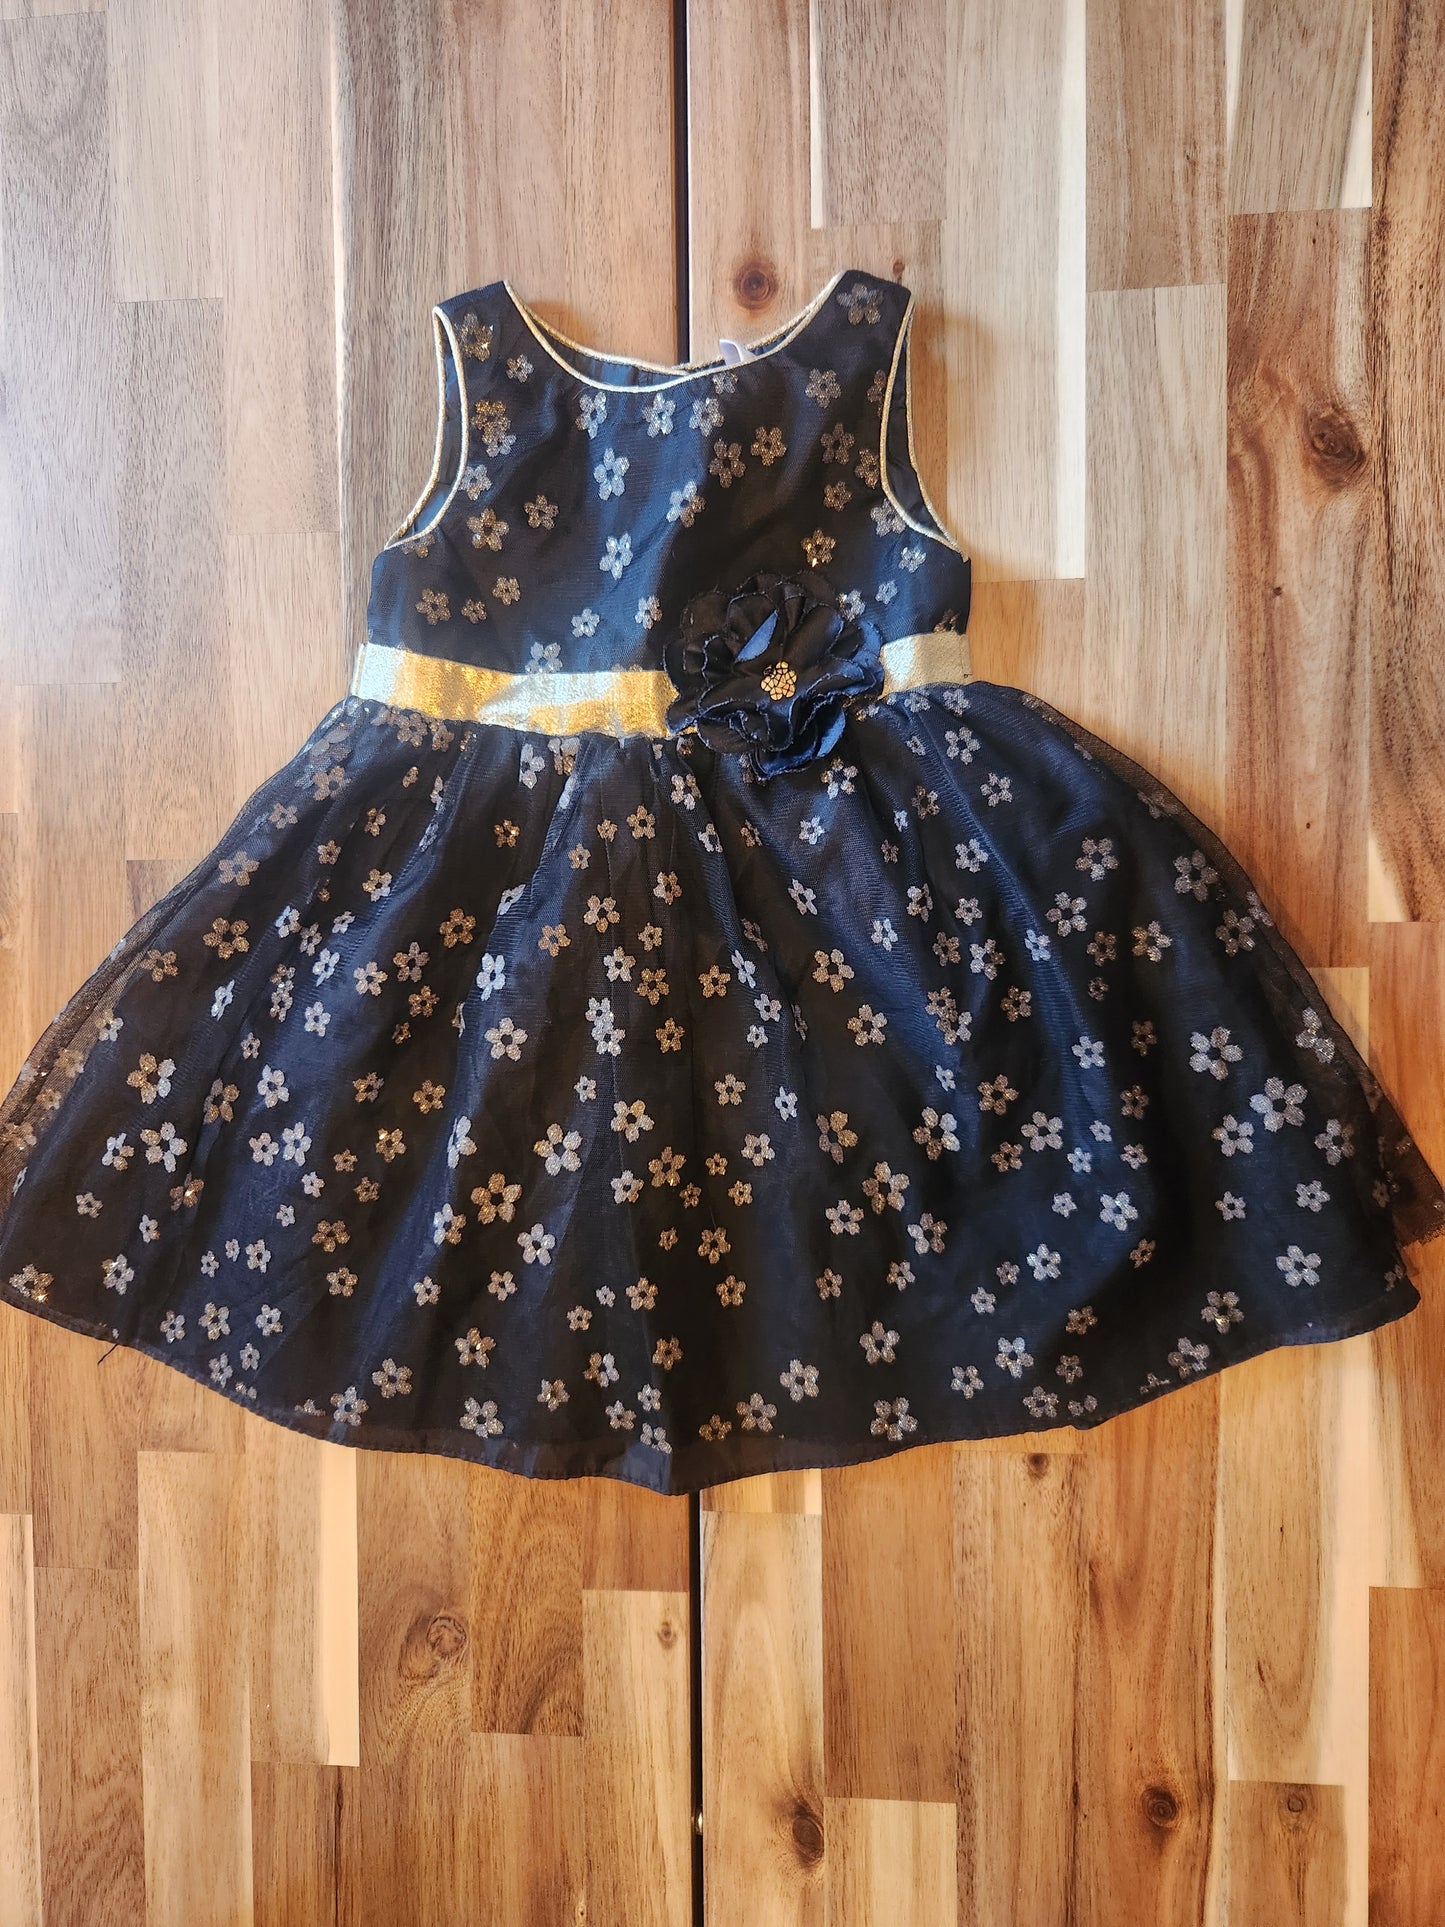 Gold and black dress 3T